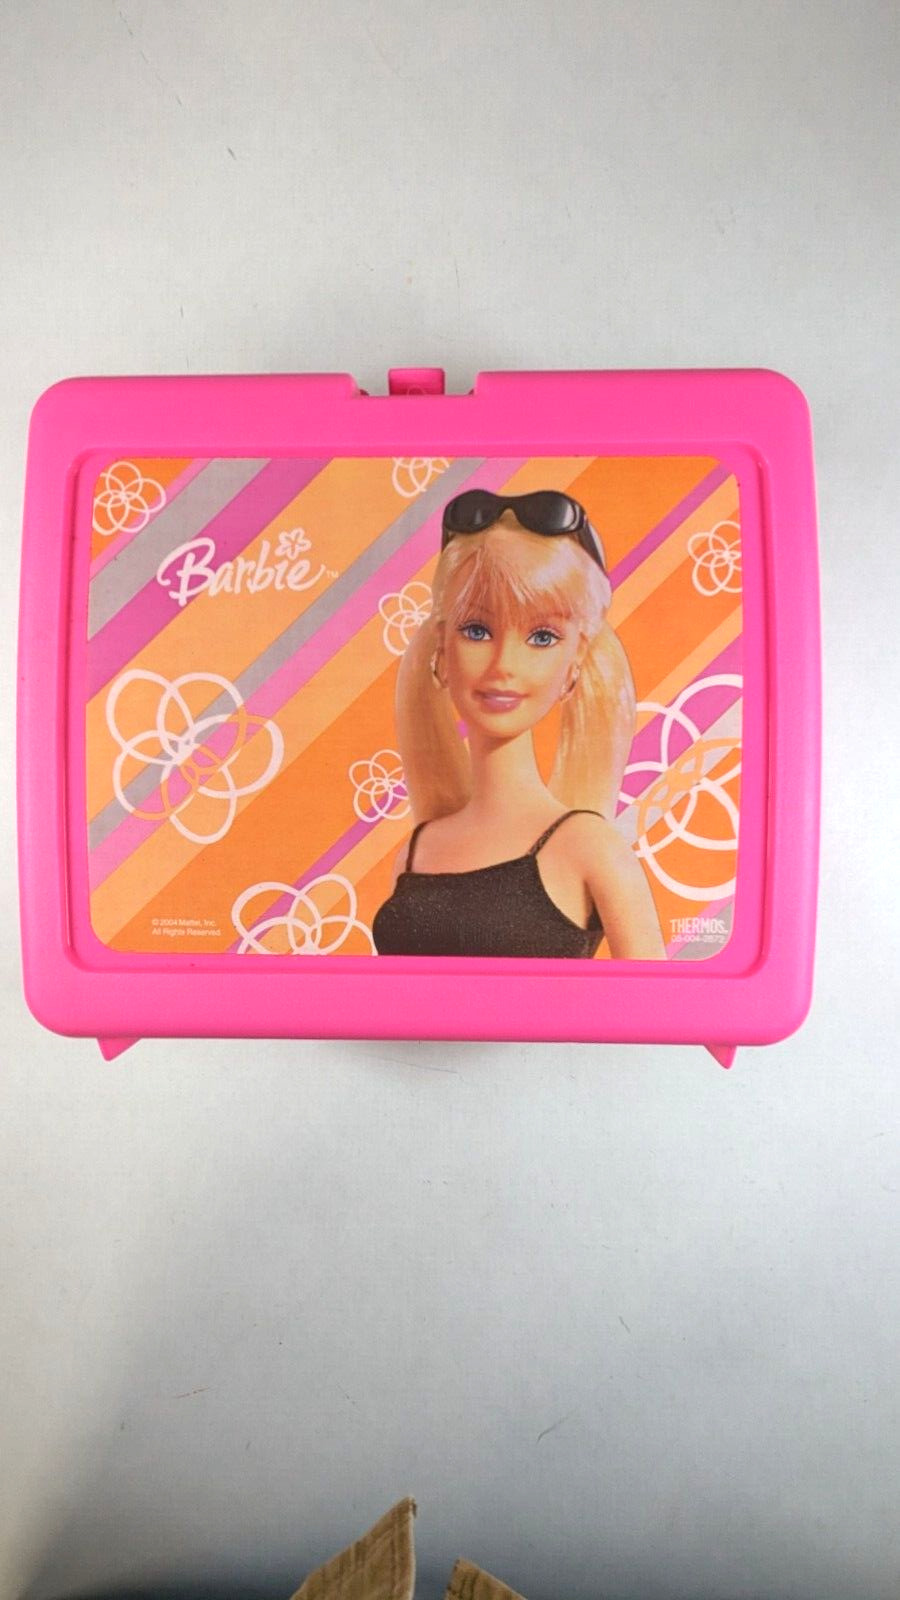 Barbie Thermos Brand Pink Plastic Lunch Box With Drink Bottle.  New